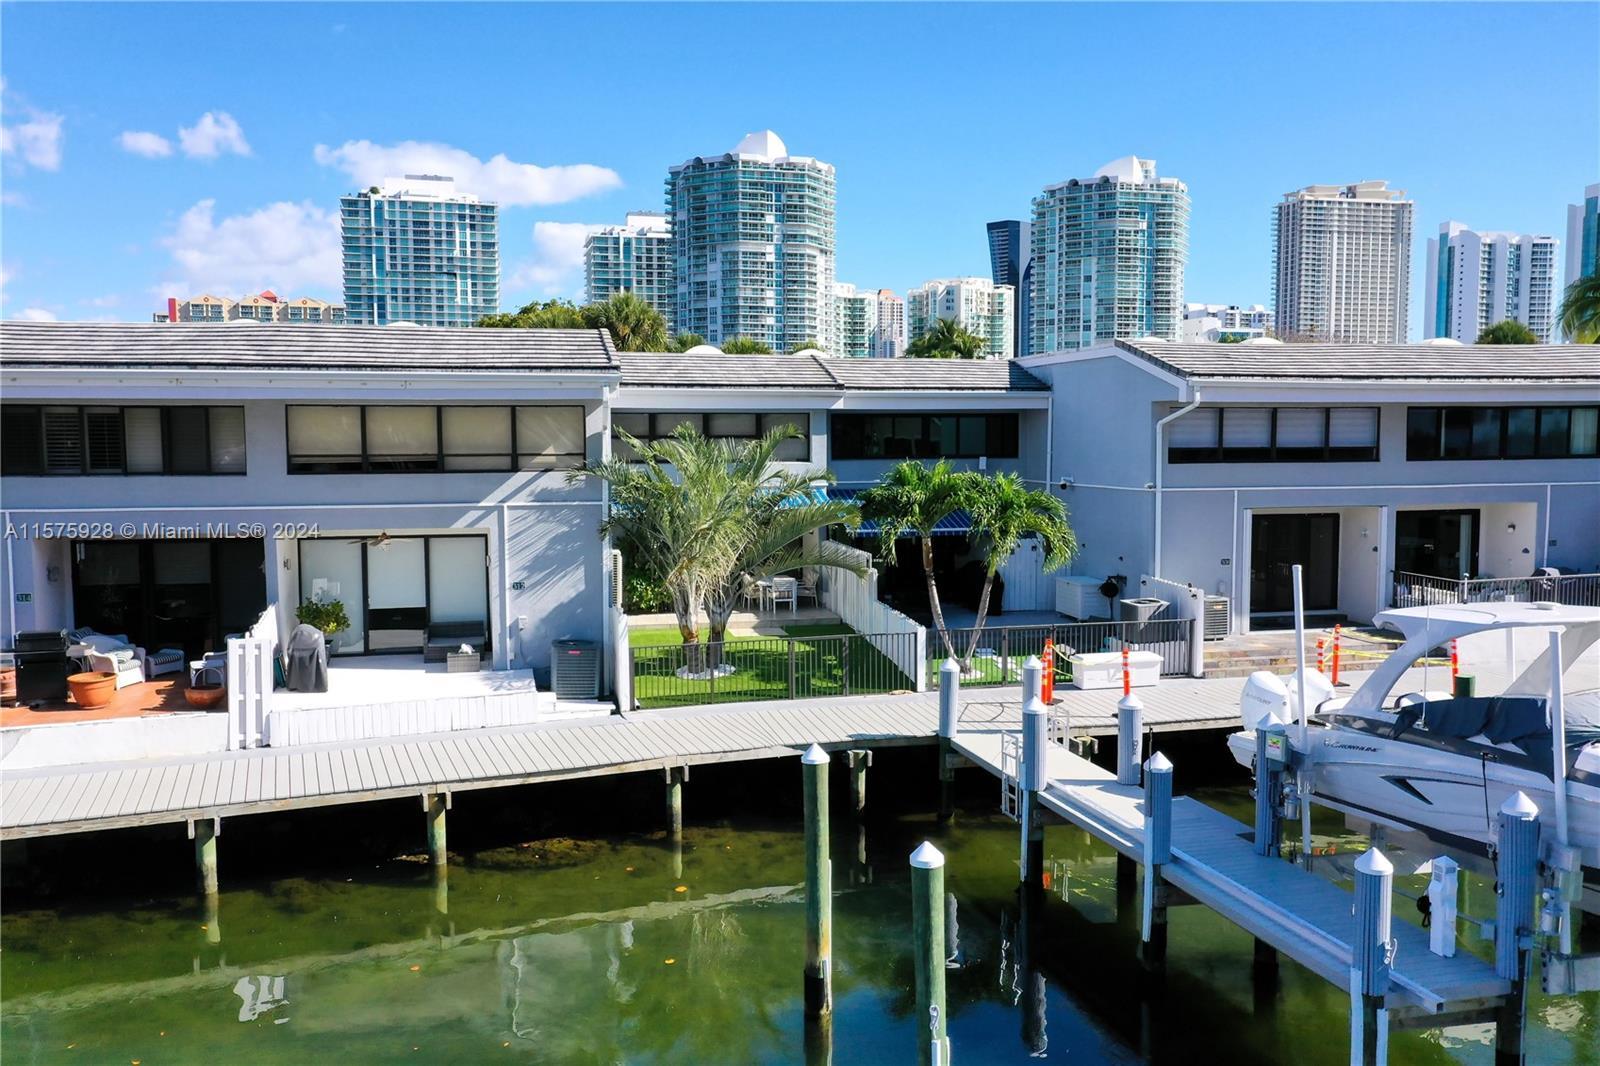 WELCOME TO YOUR WATERFRONT SANCTUARY IN BEAUTIFUL RIVIERA, NESTLED IN THE HEART OF SUNNY ISLES, FLOR